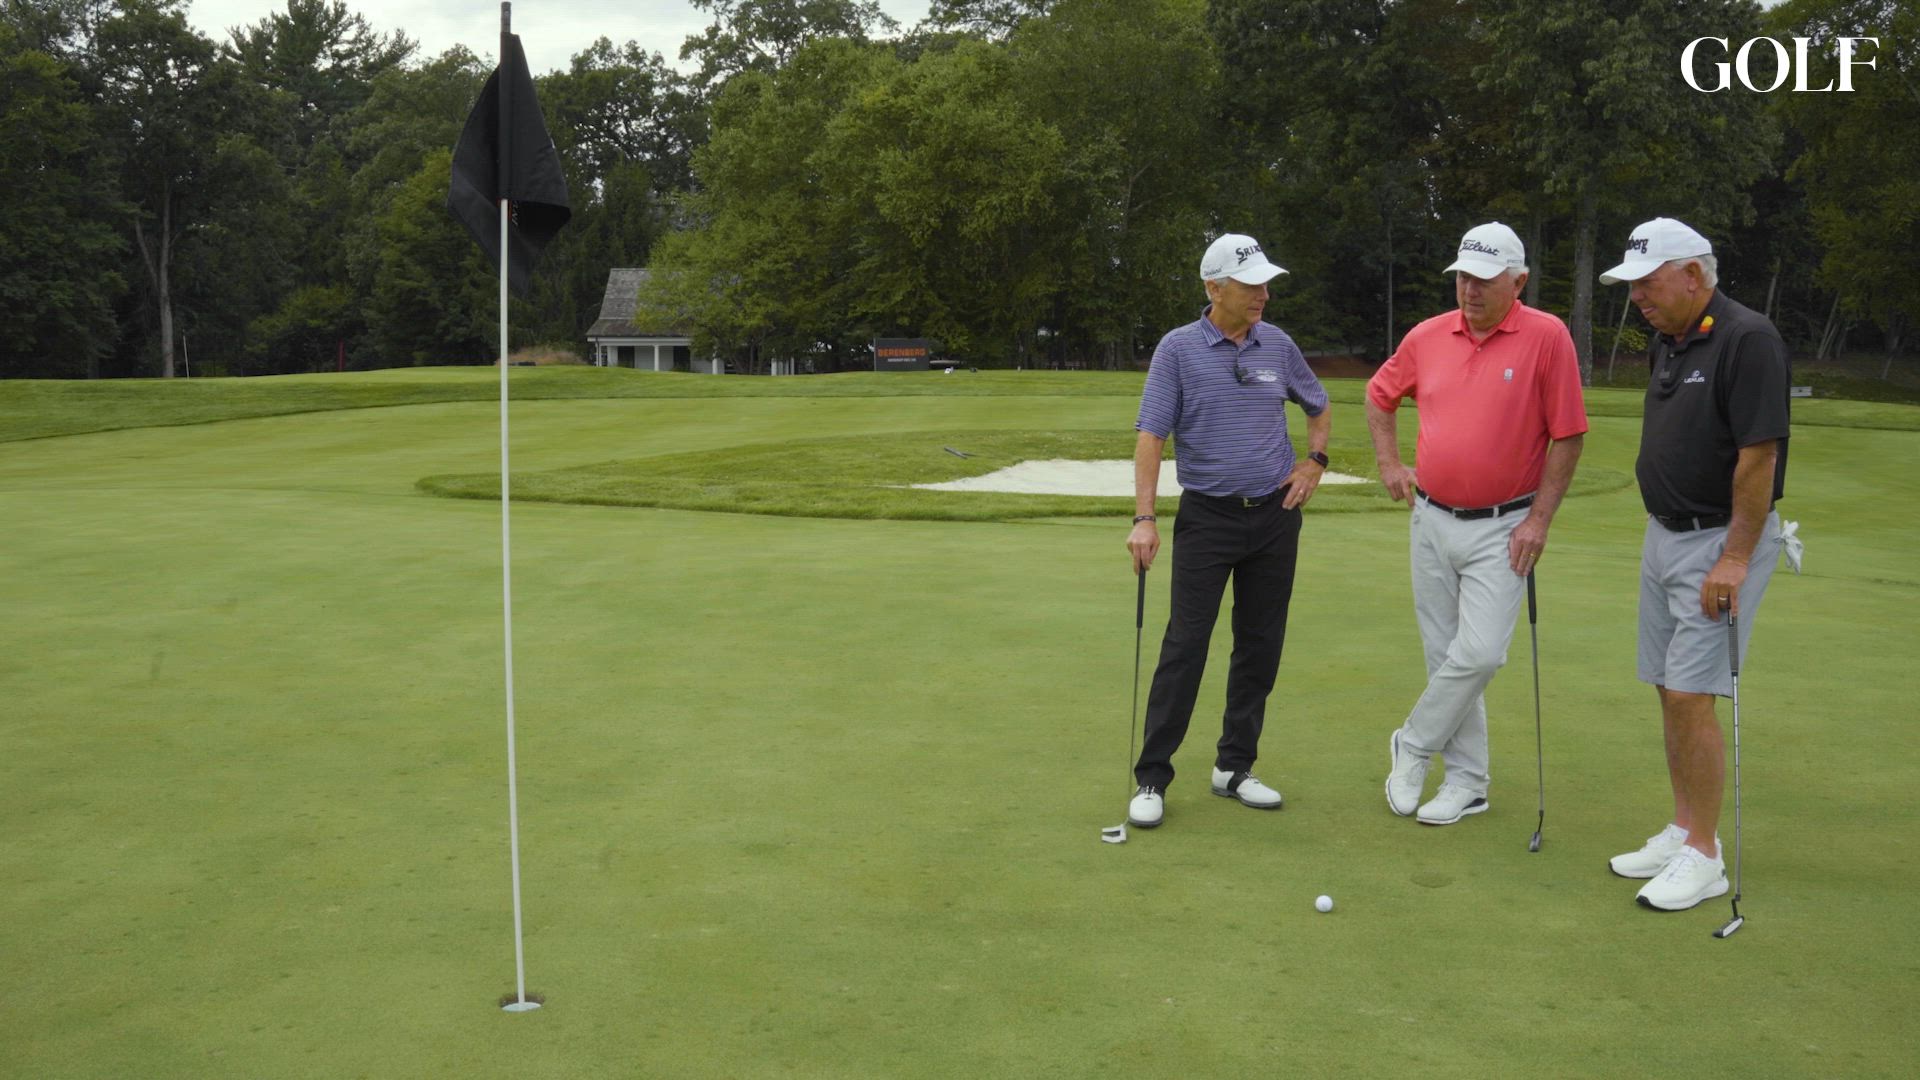 That putt good? Former Ryder Cuppers debate acceptable concession range